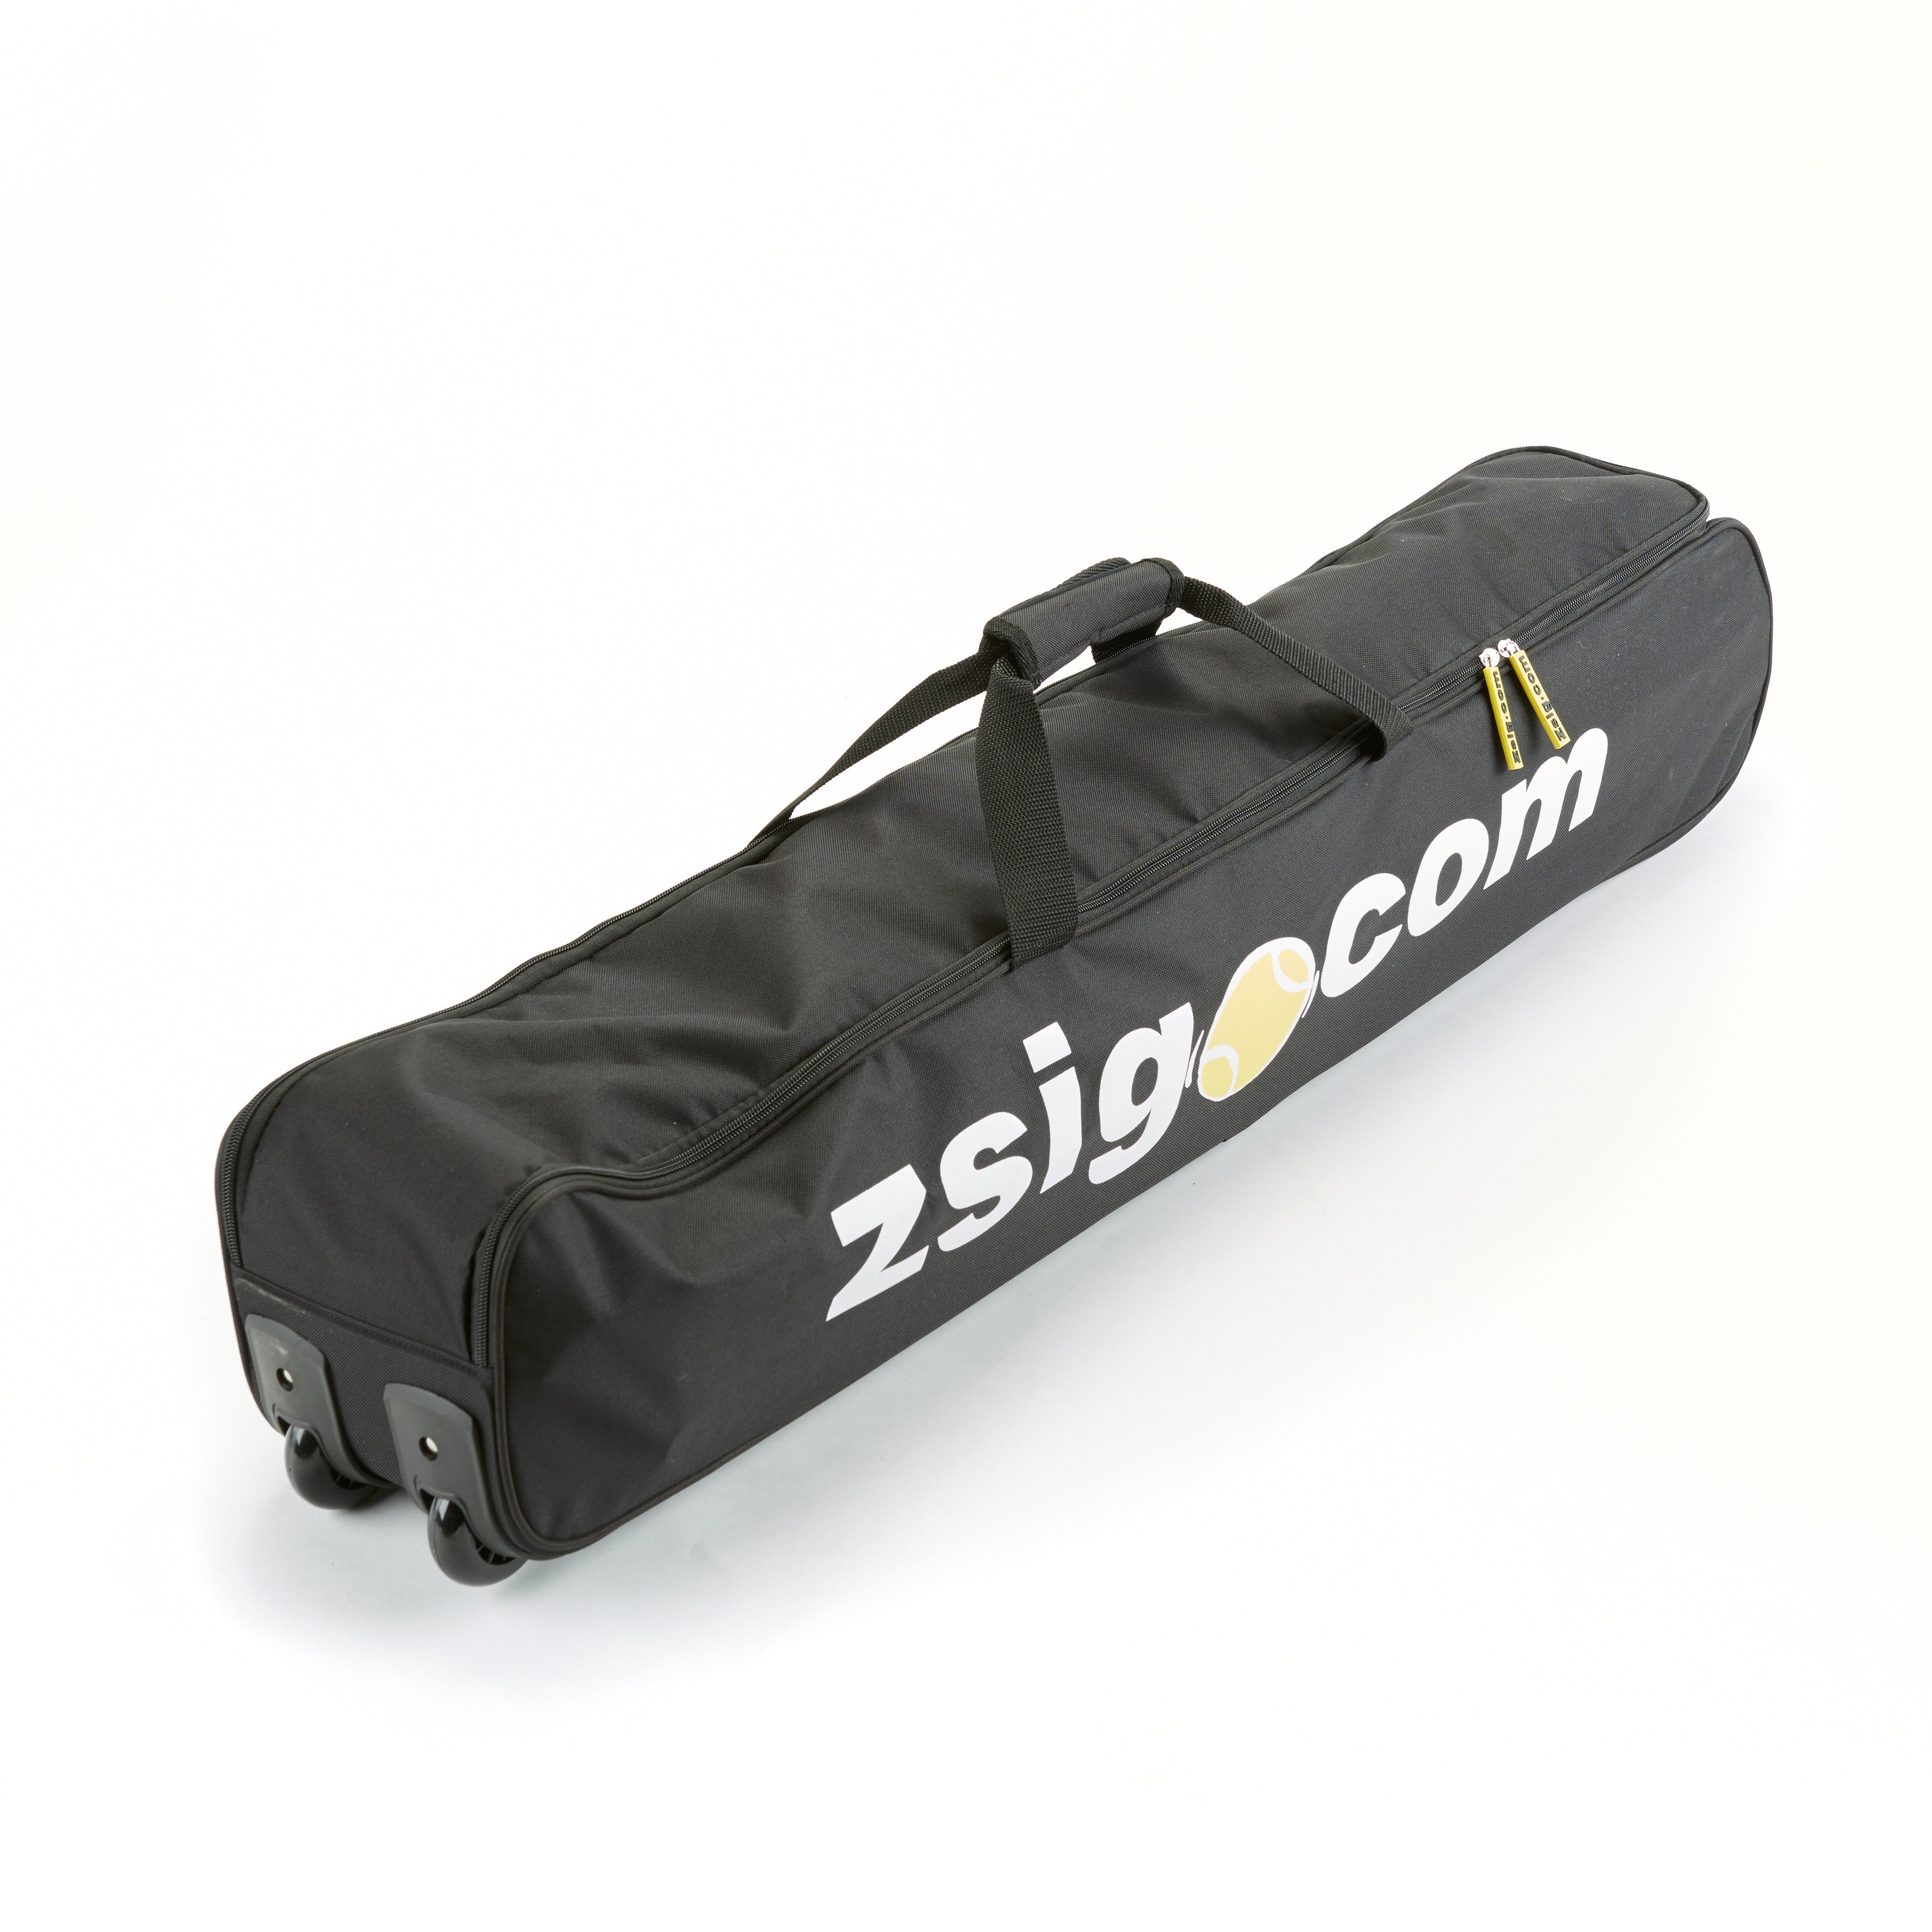 Our new portable full size tennis net is easy to transport packed in its bespoke wheeled holdall.